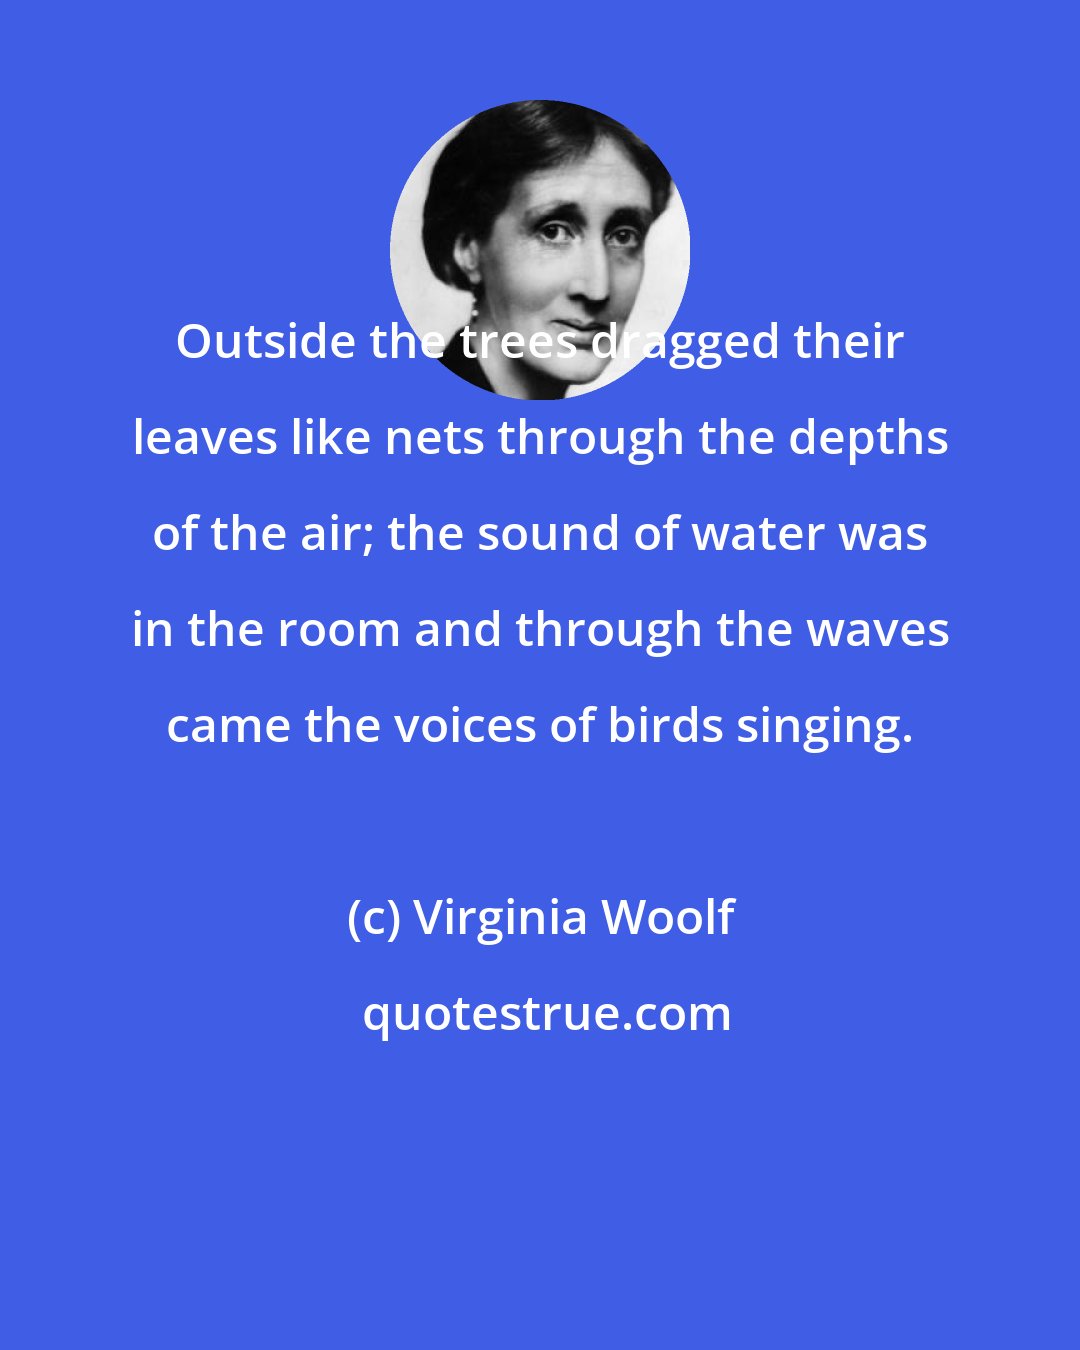 Virginia Woolf: Outside the trees dragged their leaves like nets through the depths of the air; the sound of water was in the room and through the waves came the voices of birds singing.